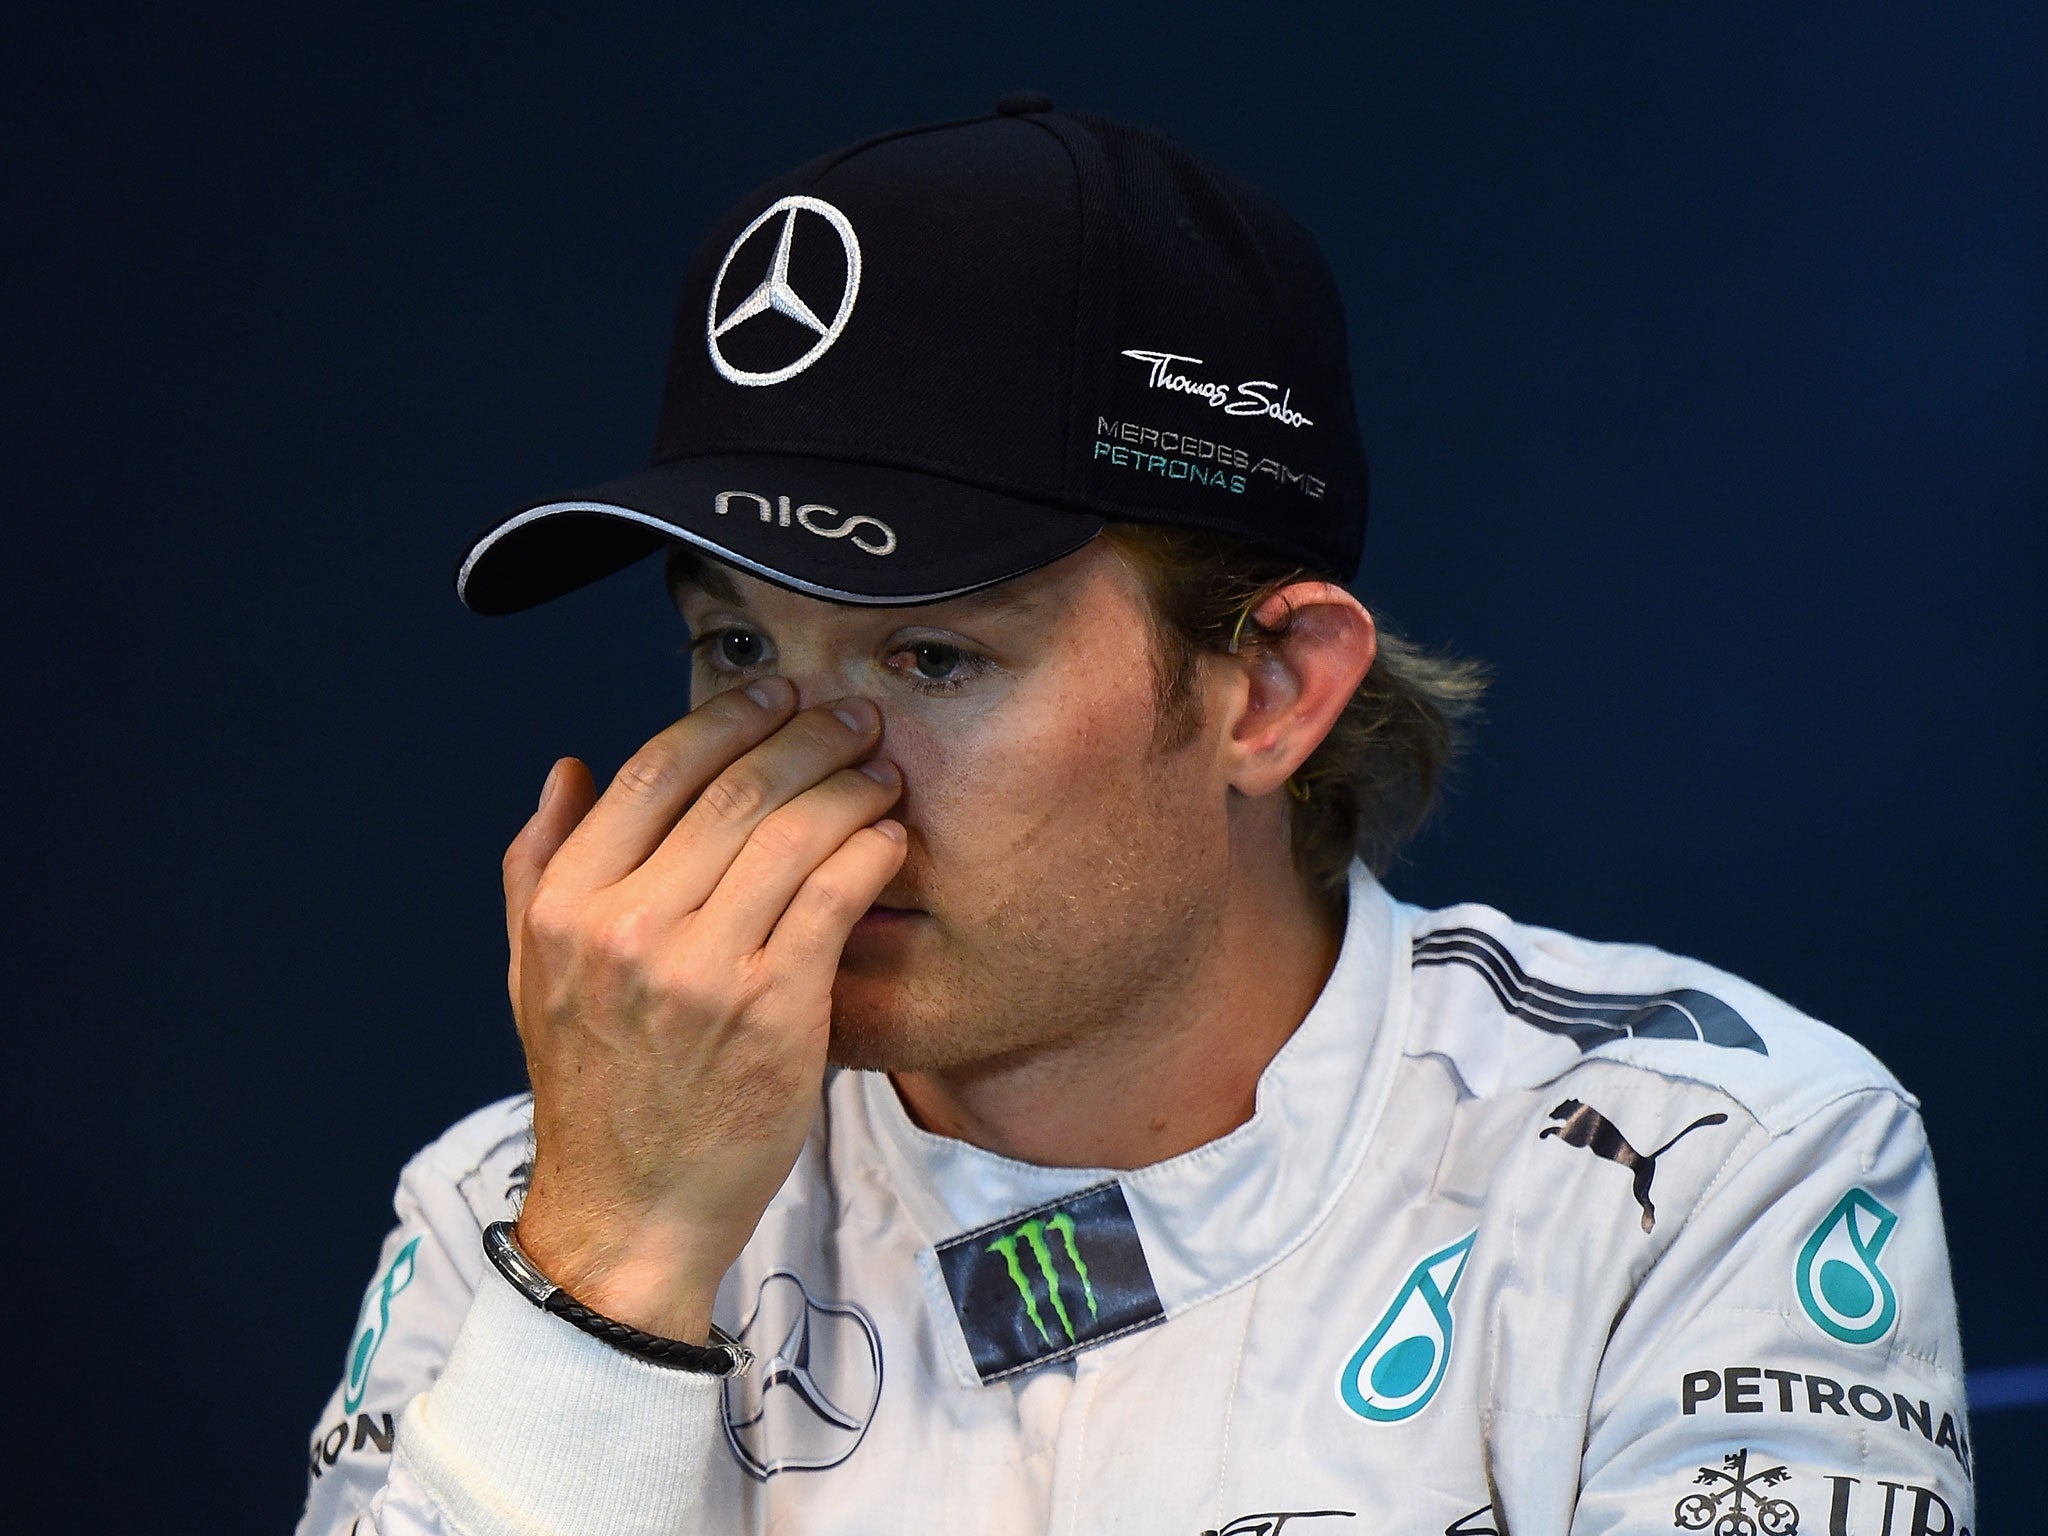 Nico Rosberg has admitted for the first time to "regret" over his Spa shame with Lewis Hamilton, but is still refusing to apologise.